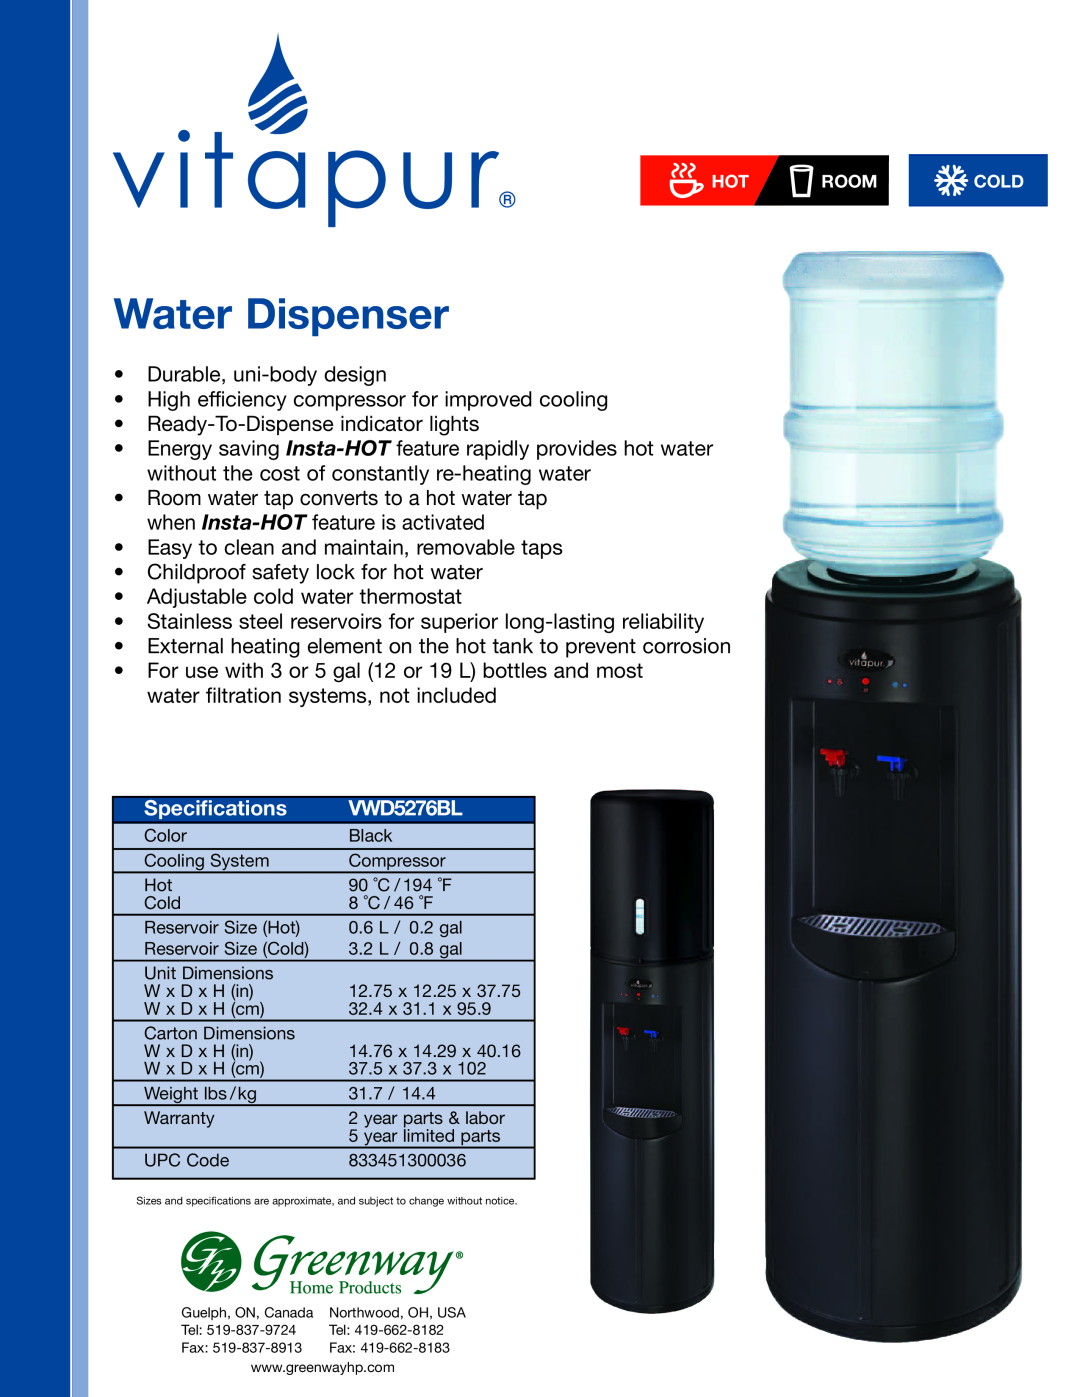 Greenway Home Products VWD5276BLK specifications Water Dispenser, Specifications 